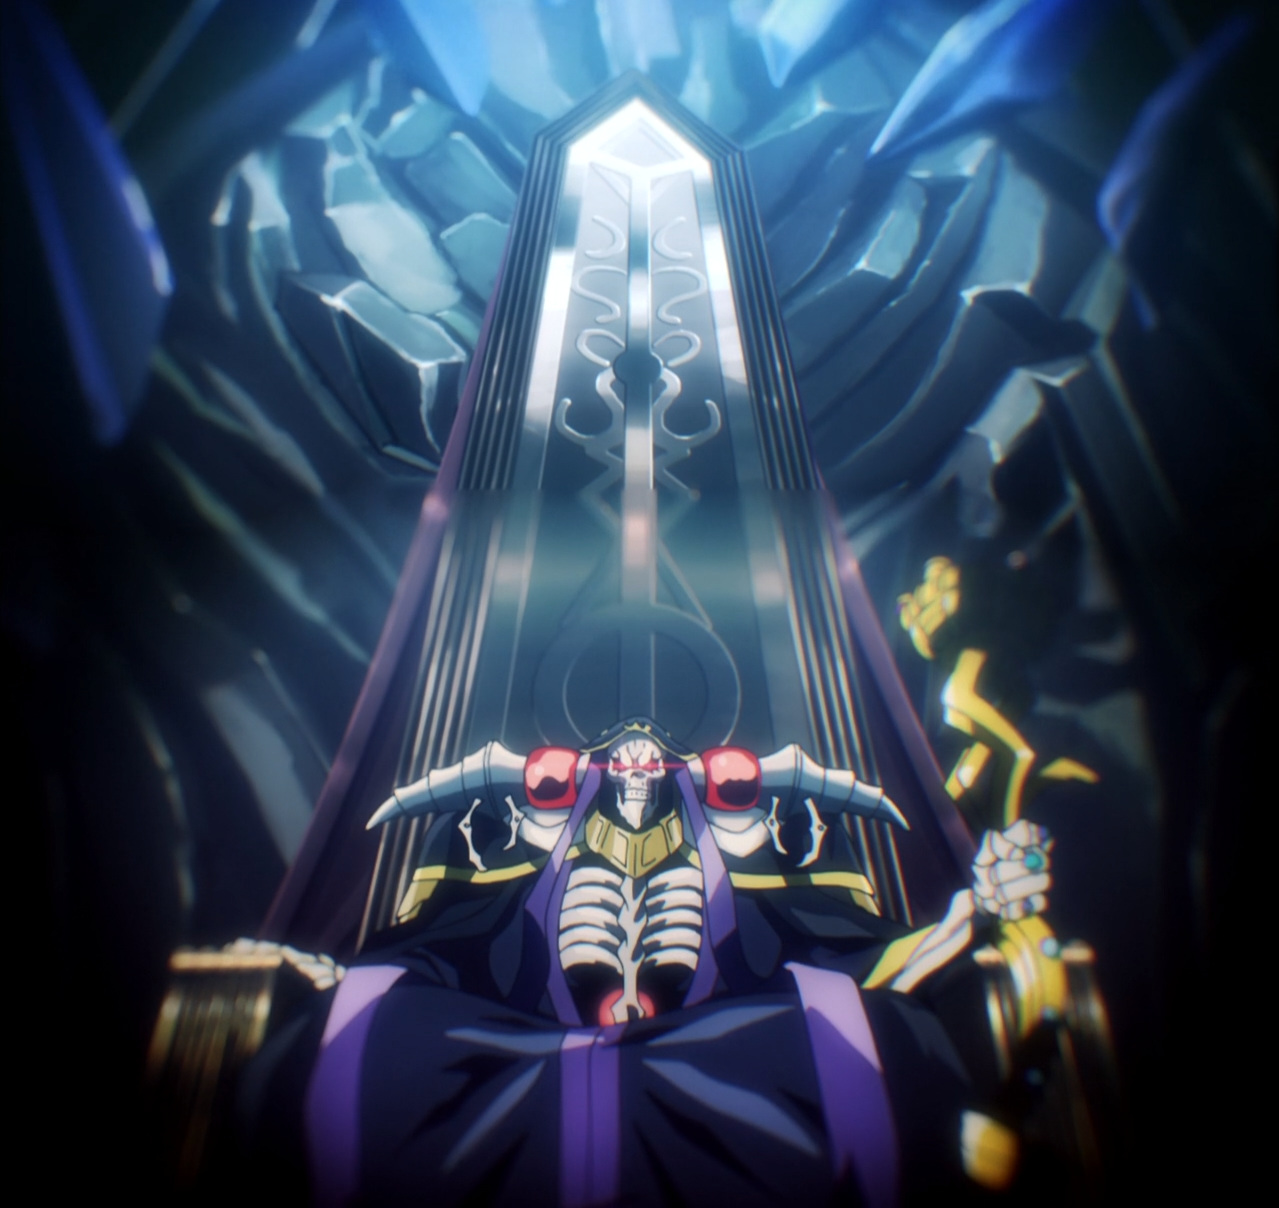 Overlord III Episode.9 Preview, Overlord, Overlord III Episode.9 Preview  War of Worlds, By Overlord